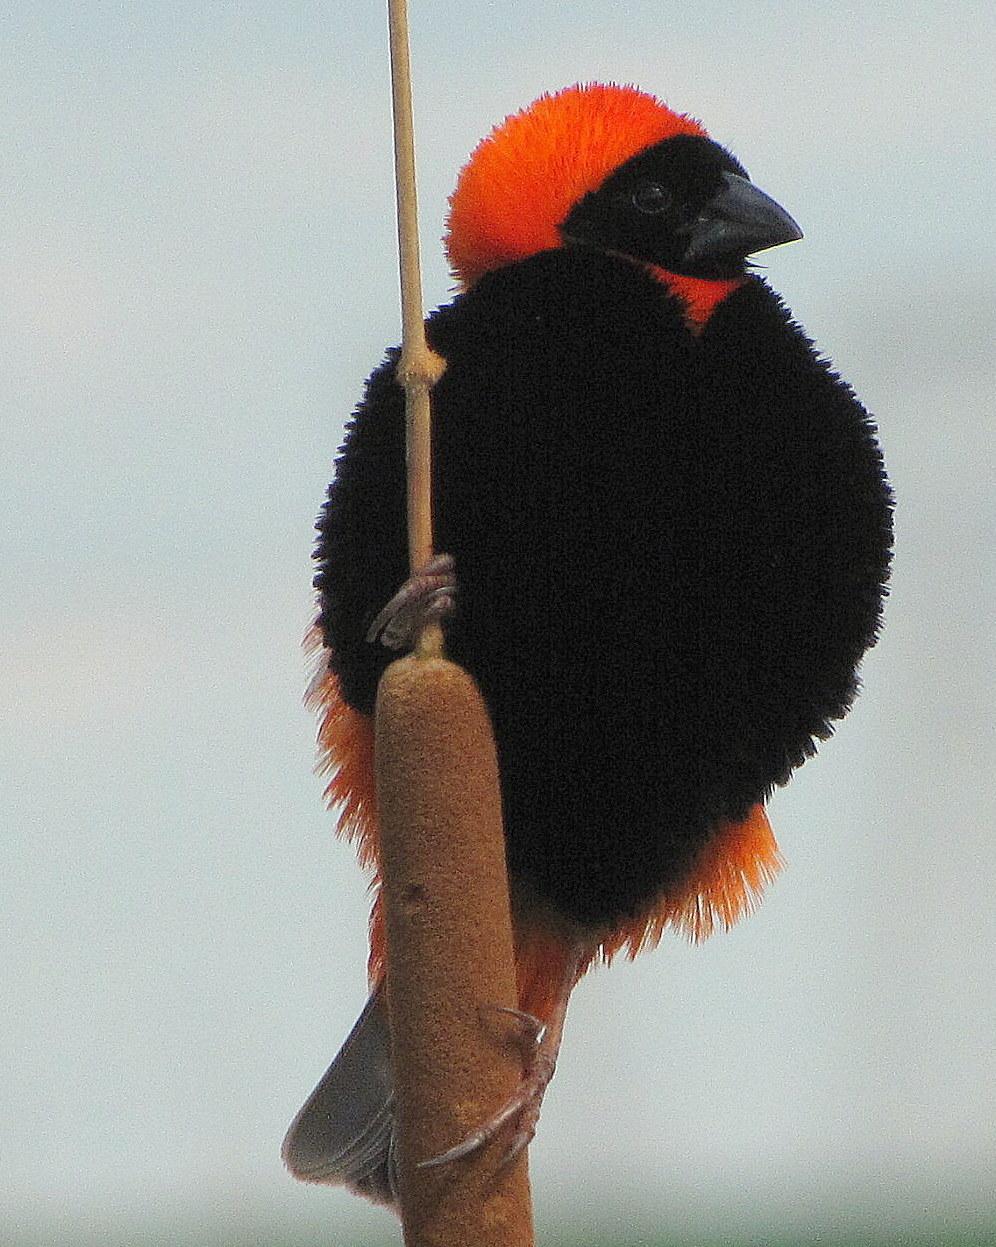 Southern Red Bishop Photo by Richard  Lowe